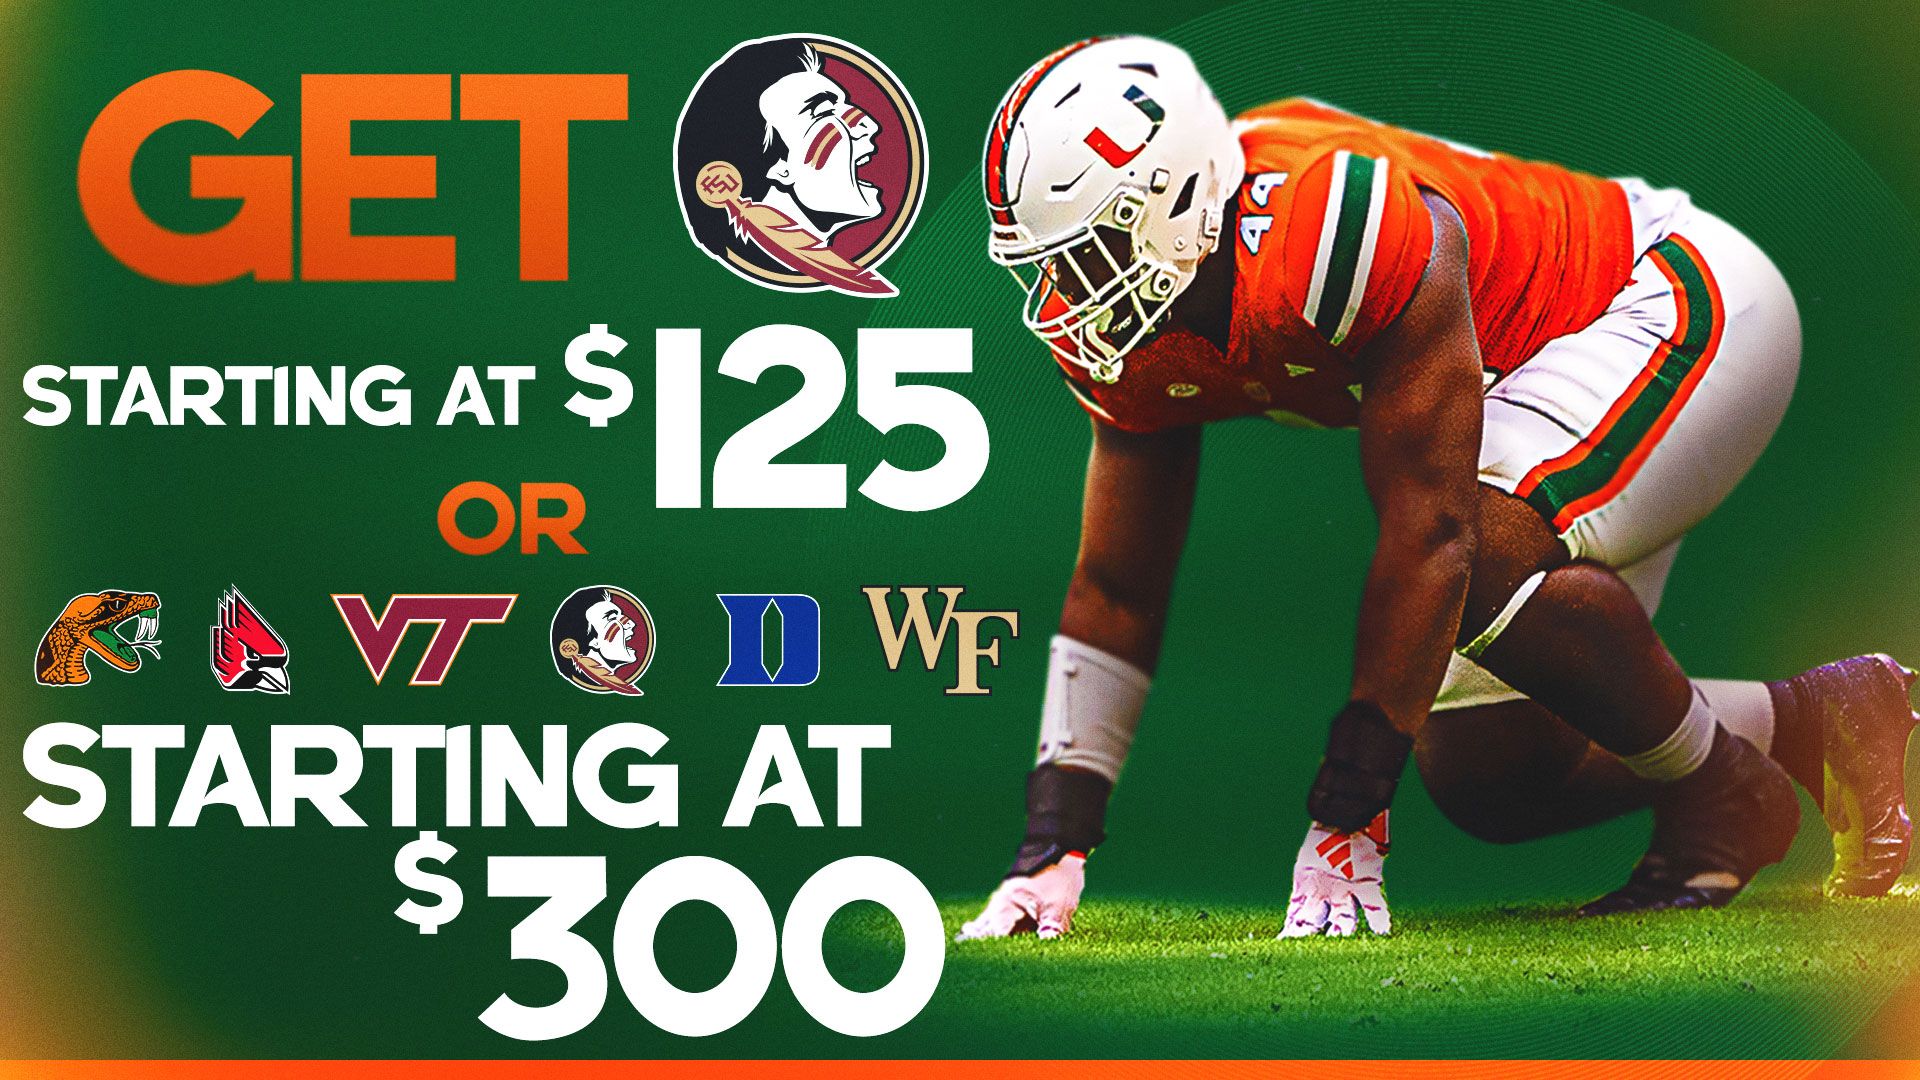 Lock In Your Seats for FSU & All 5 Other Matchups, Starting at Just $300!